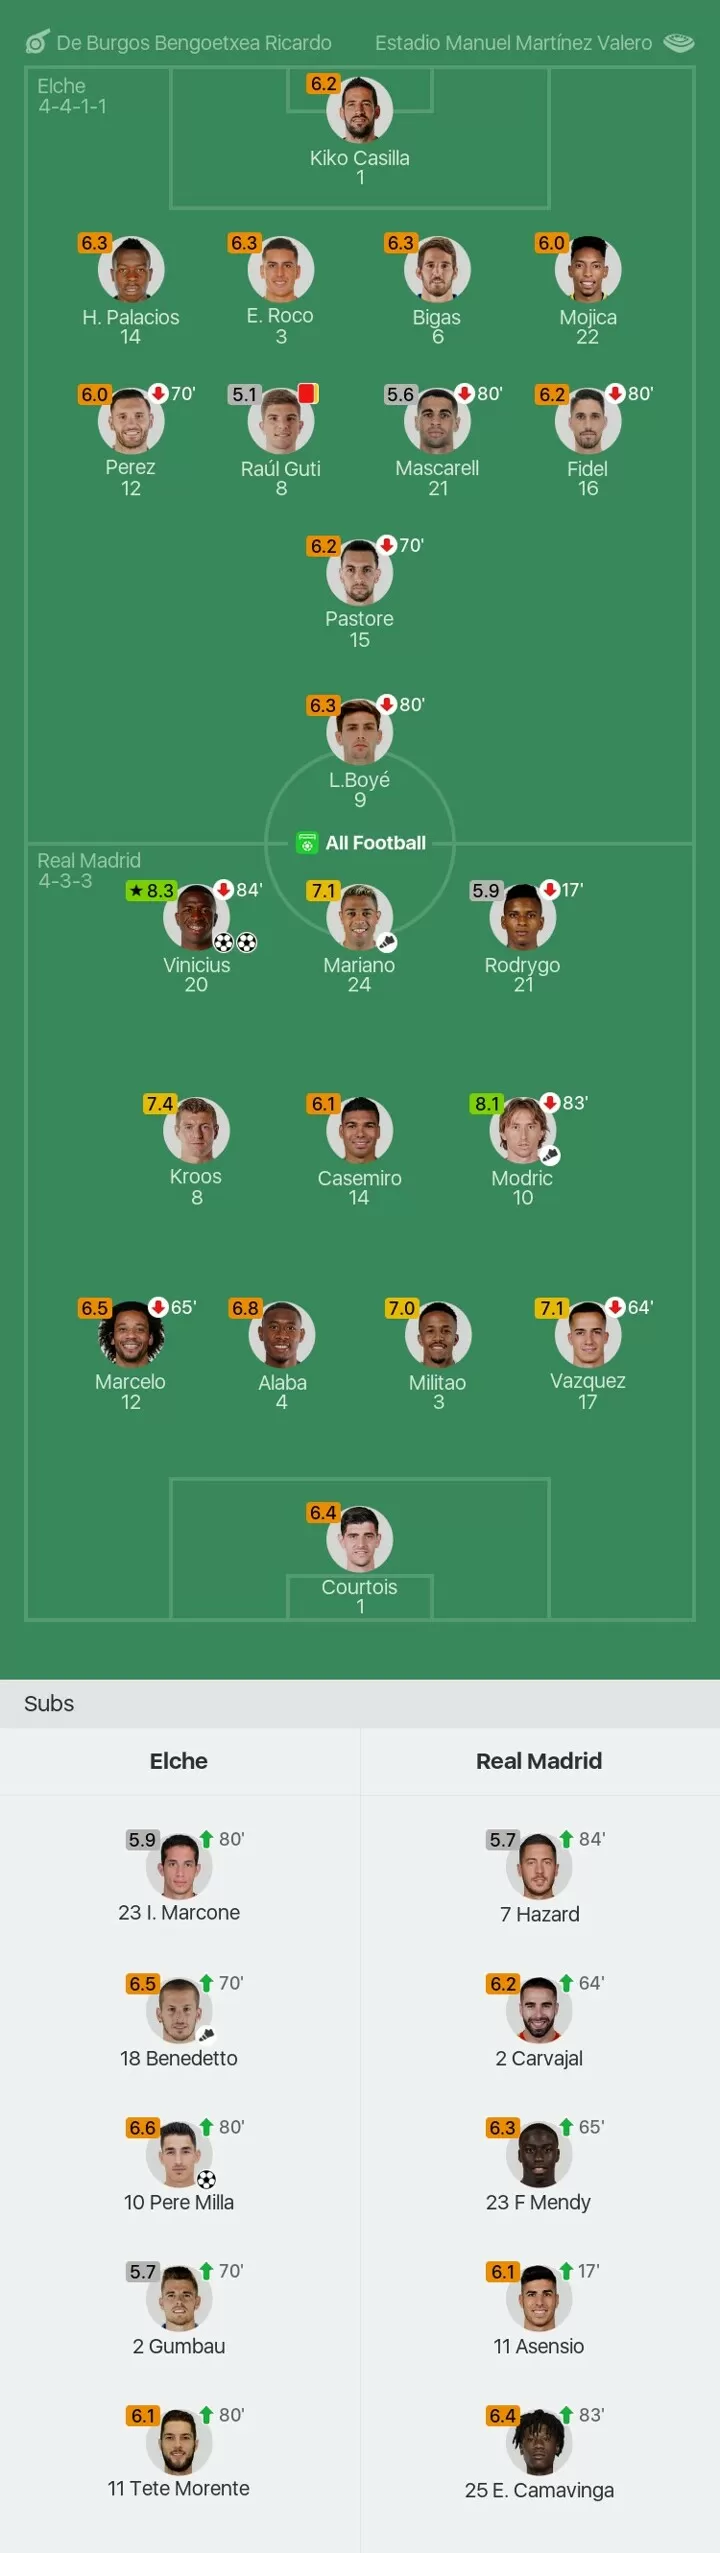 Elche 1-2 Real Madrid: Player ratings